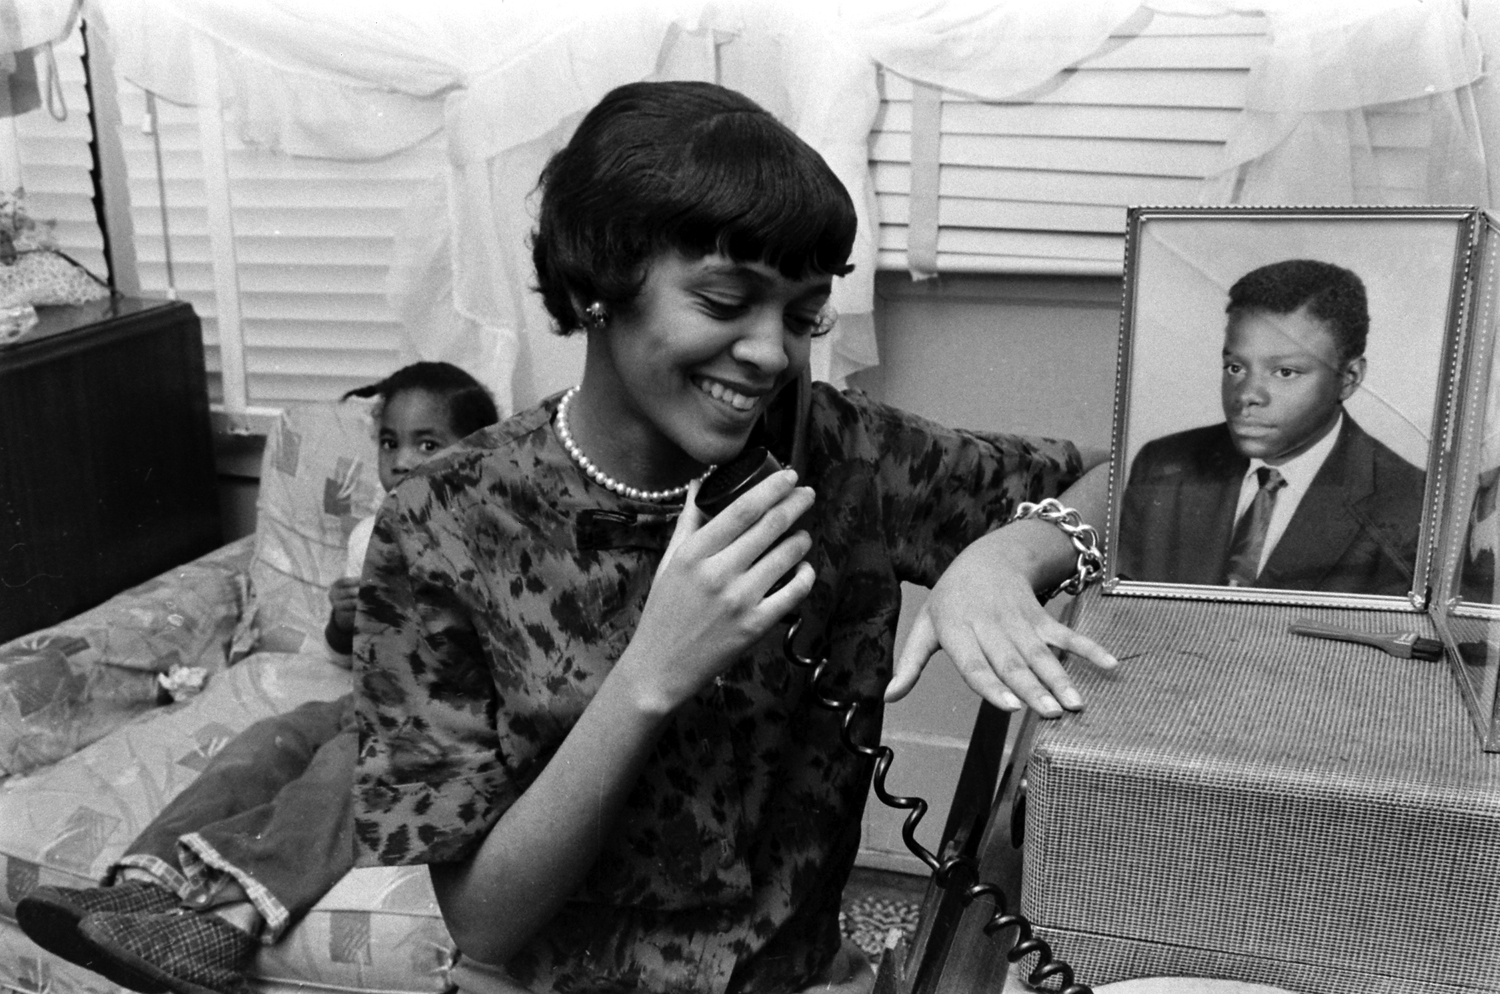 Betty Jean Reed on the phone with a friend during her first week as the only African American student at Granby High School, Norfolk, Va., 1959.